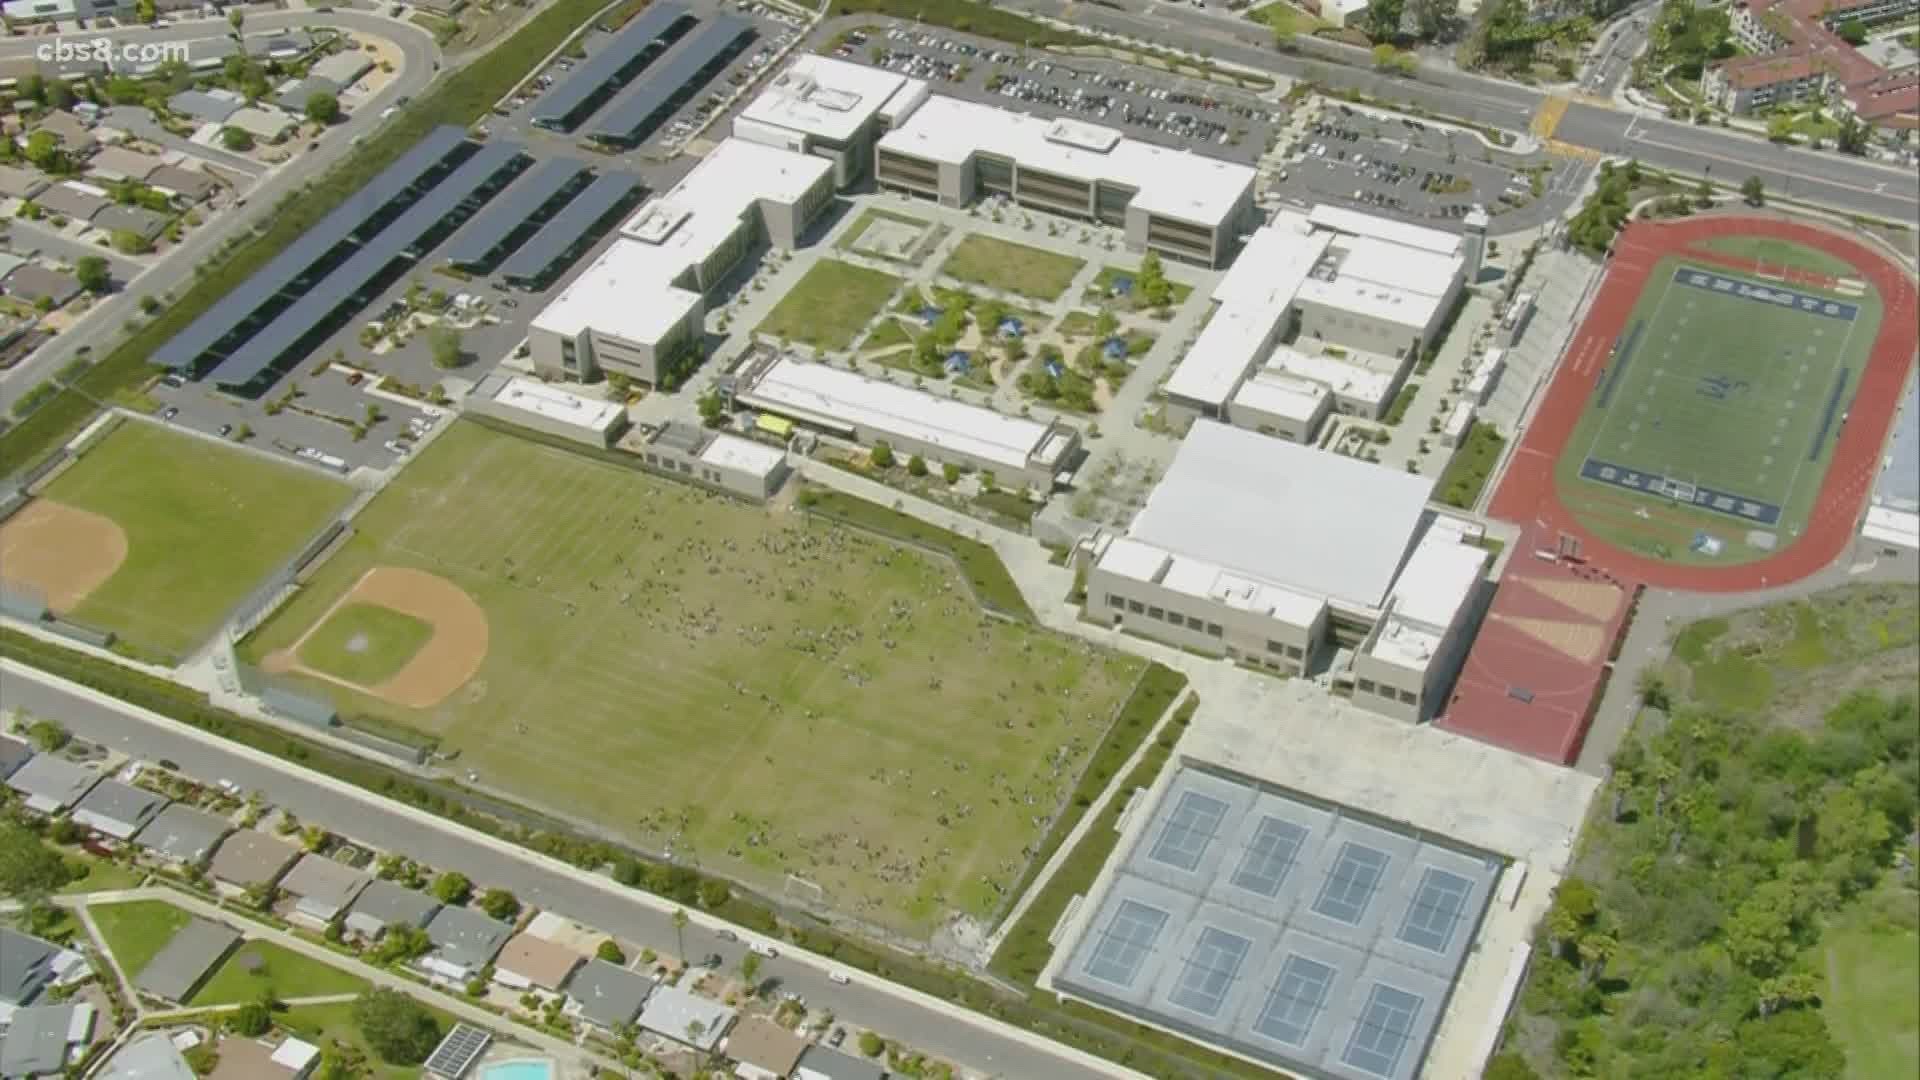 A bomb threat prompted an evacuation of students
and staff at San Marcos High School Tuesday afternoon.